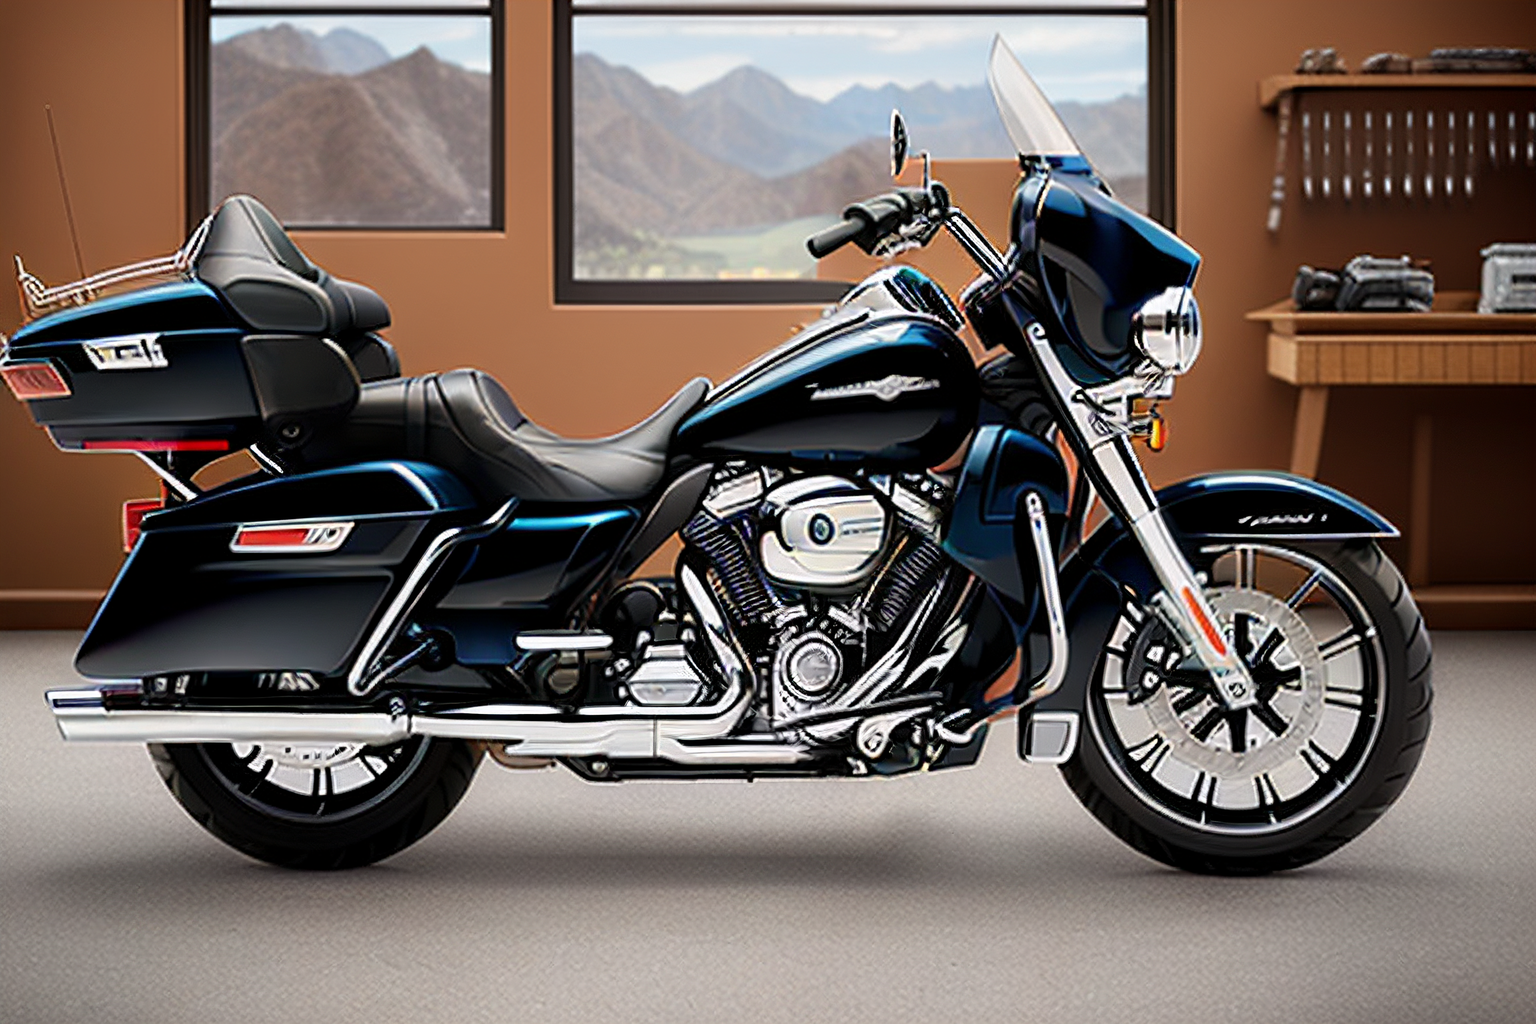 2000 Harley Davidson Fuel Injection Problems: Analysis